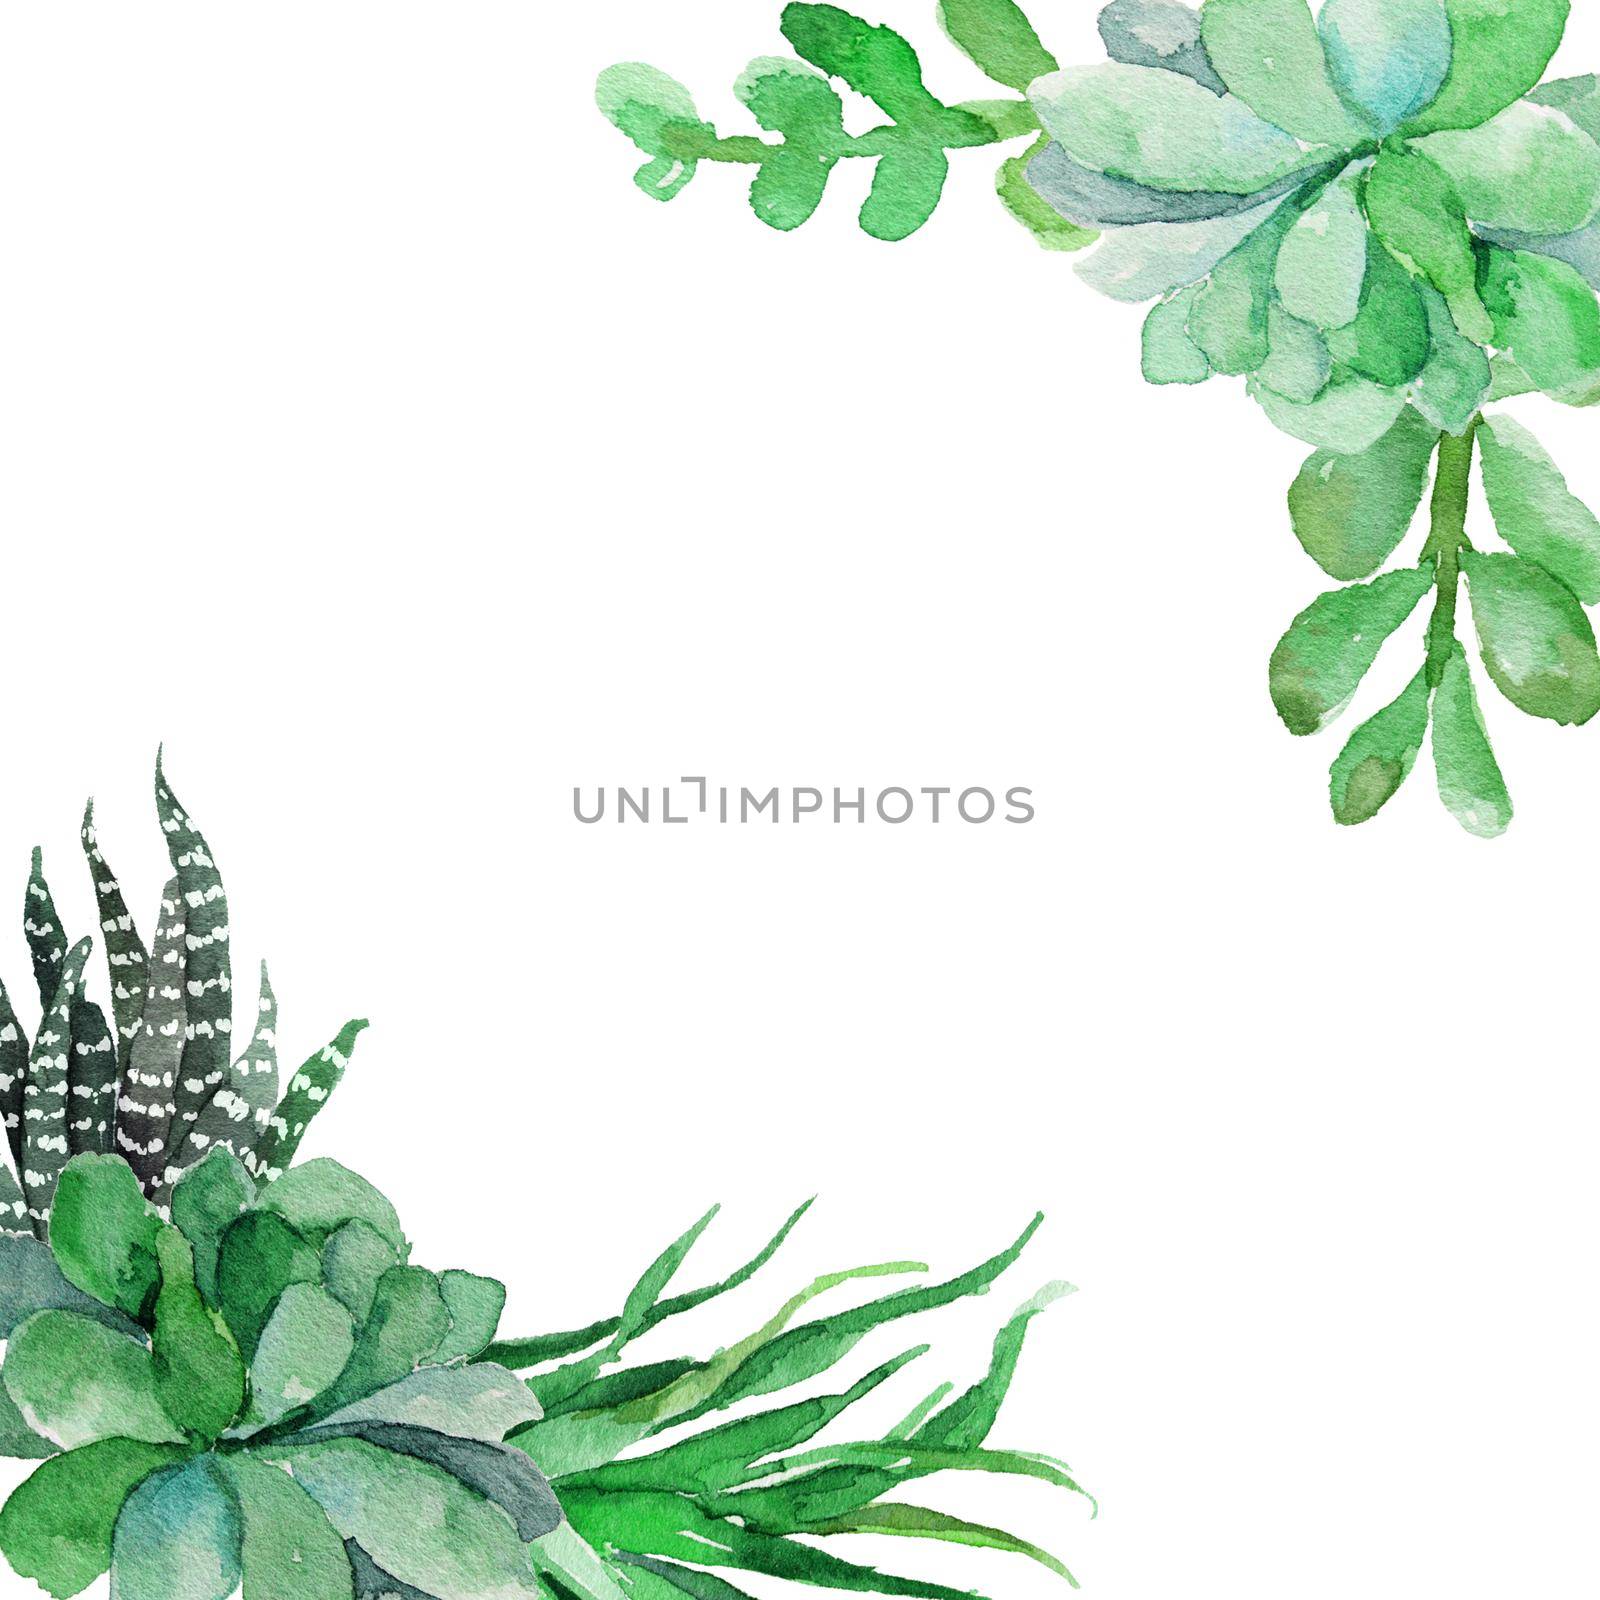 watercolor flower frame backgrounds. Beautiful greeting card with green leaves on white background. illustration. by ANITA